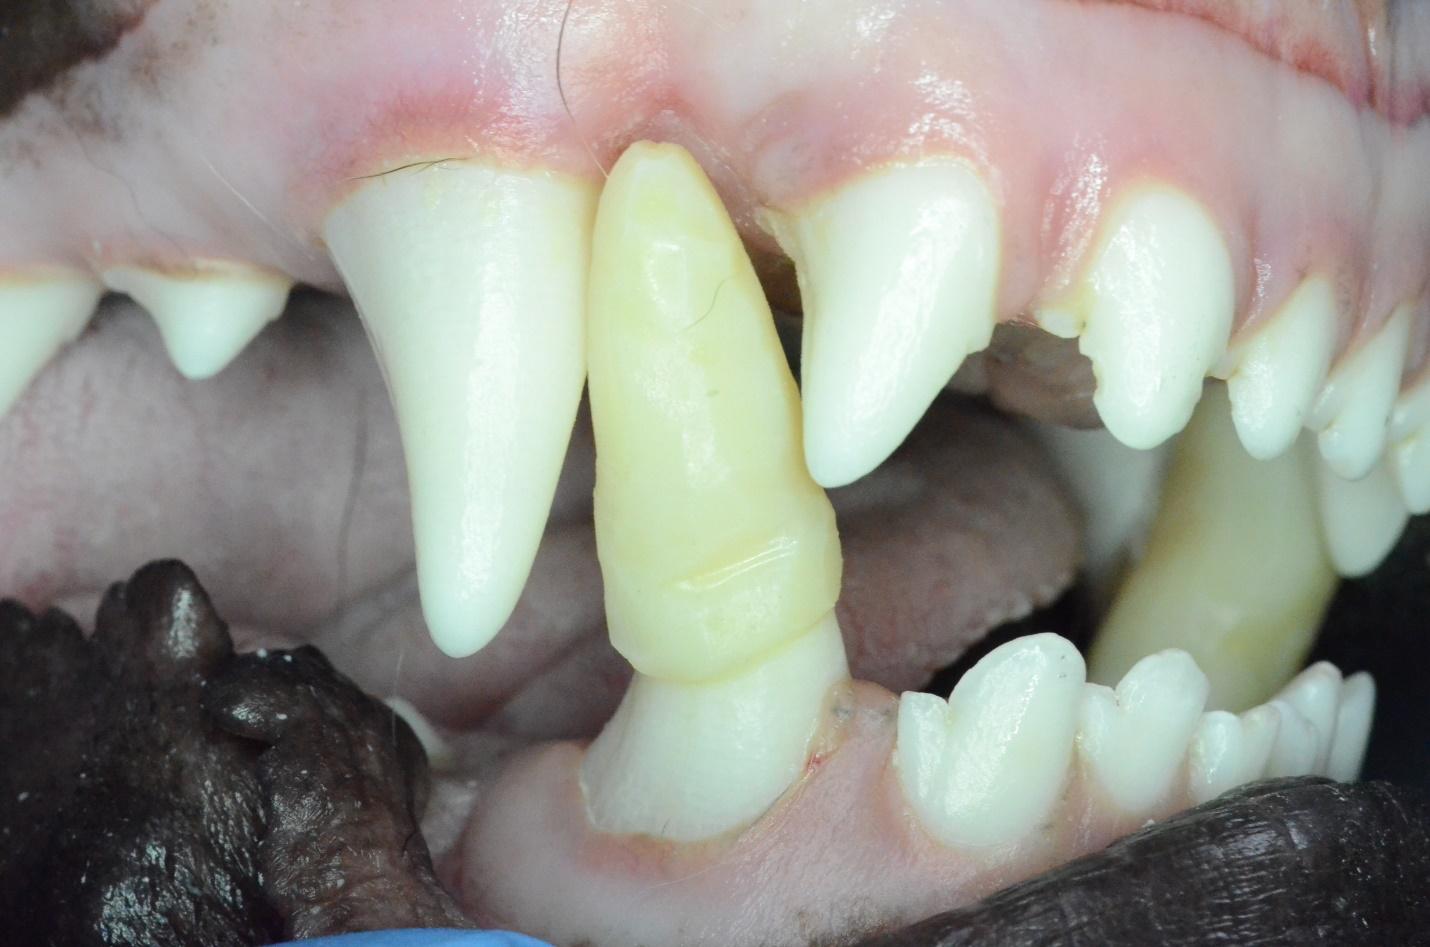 Crown extension application on the right mandibular canine